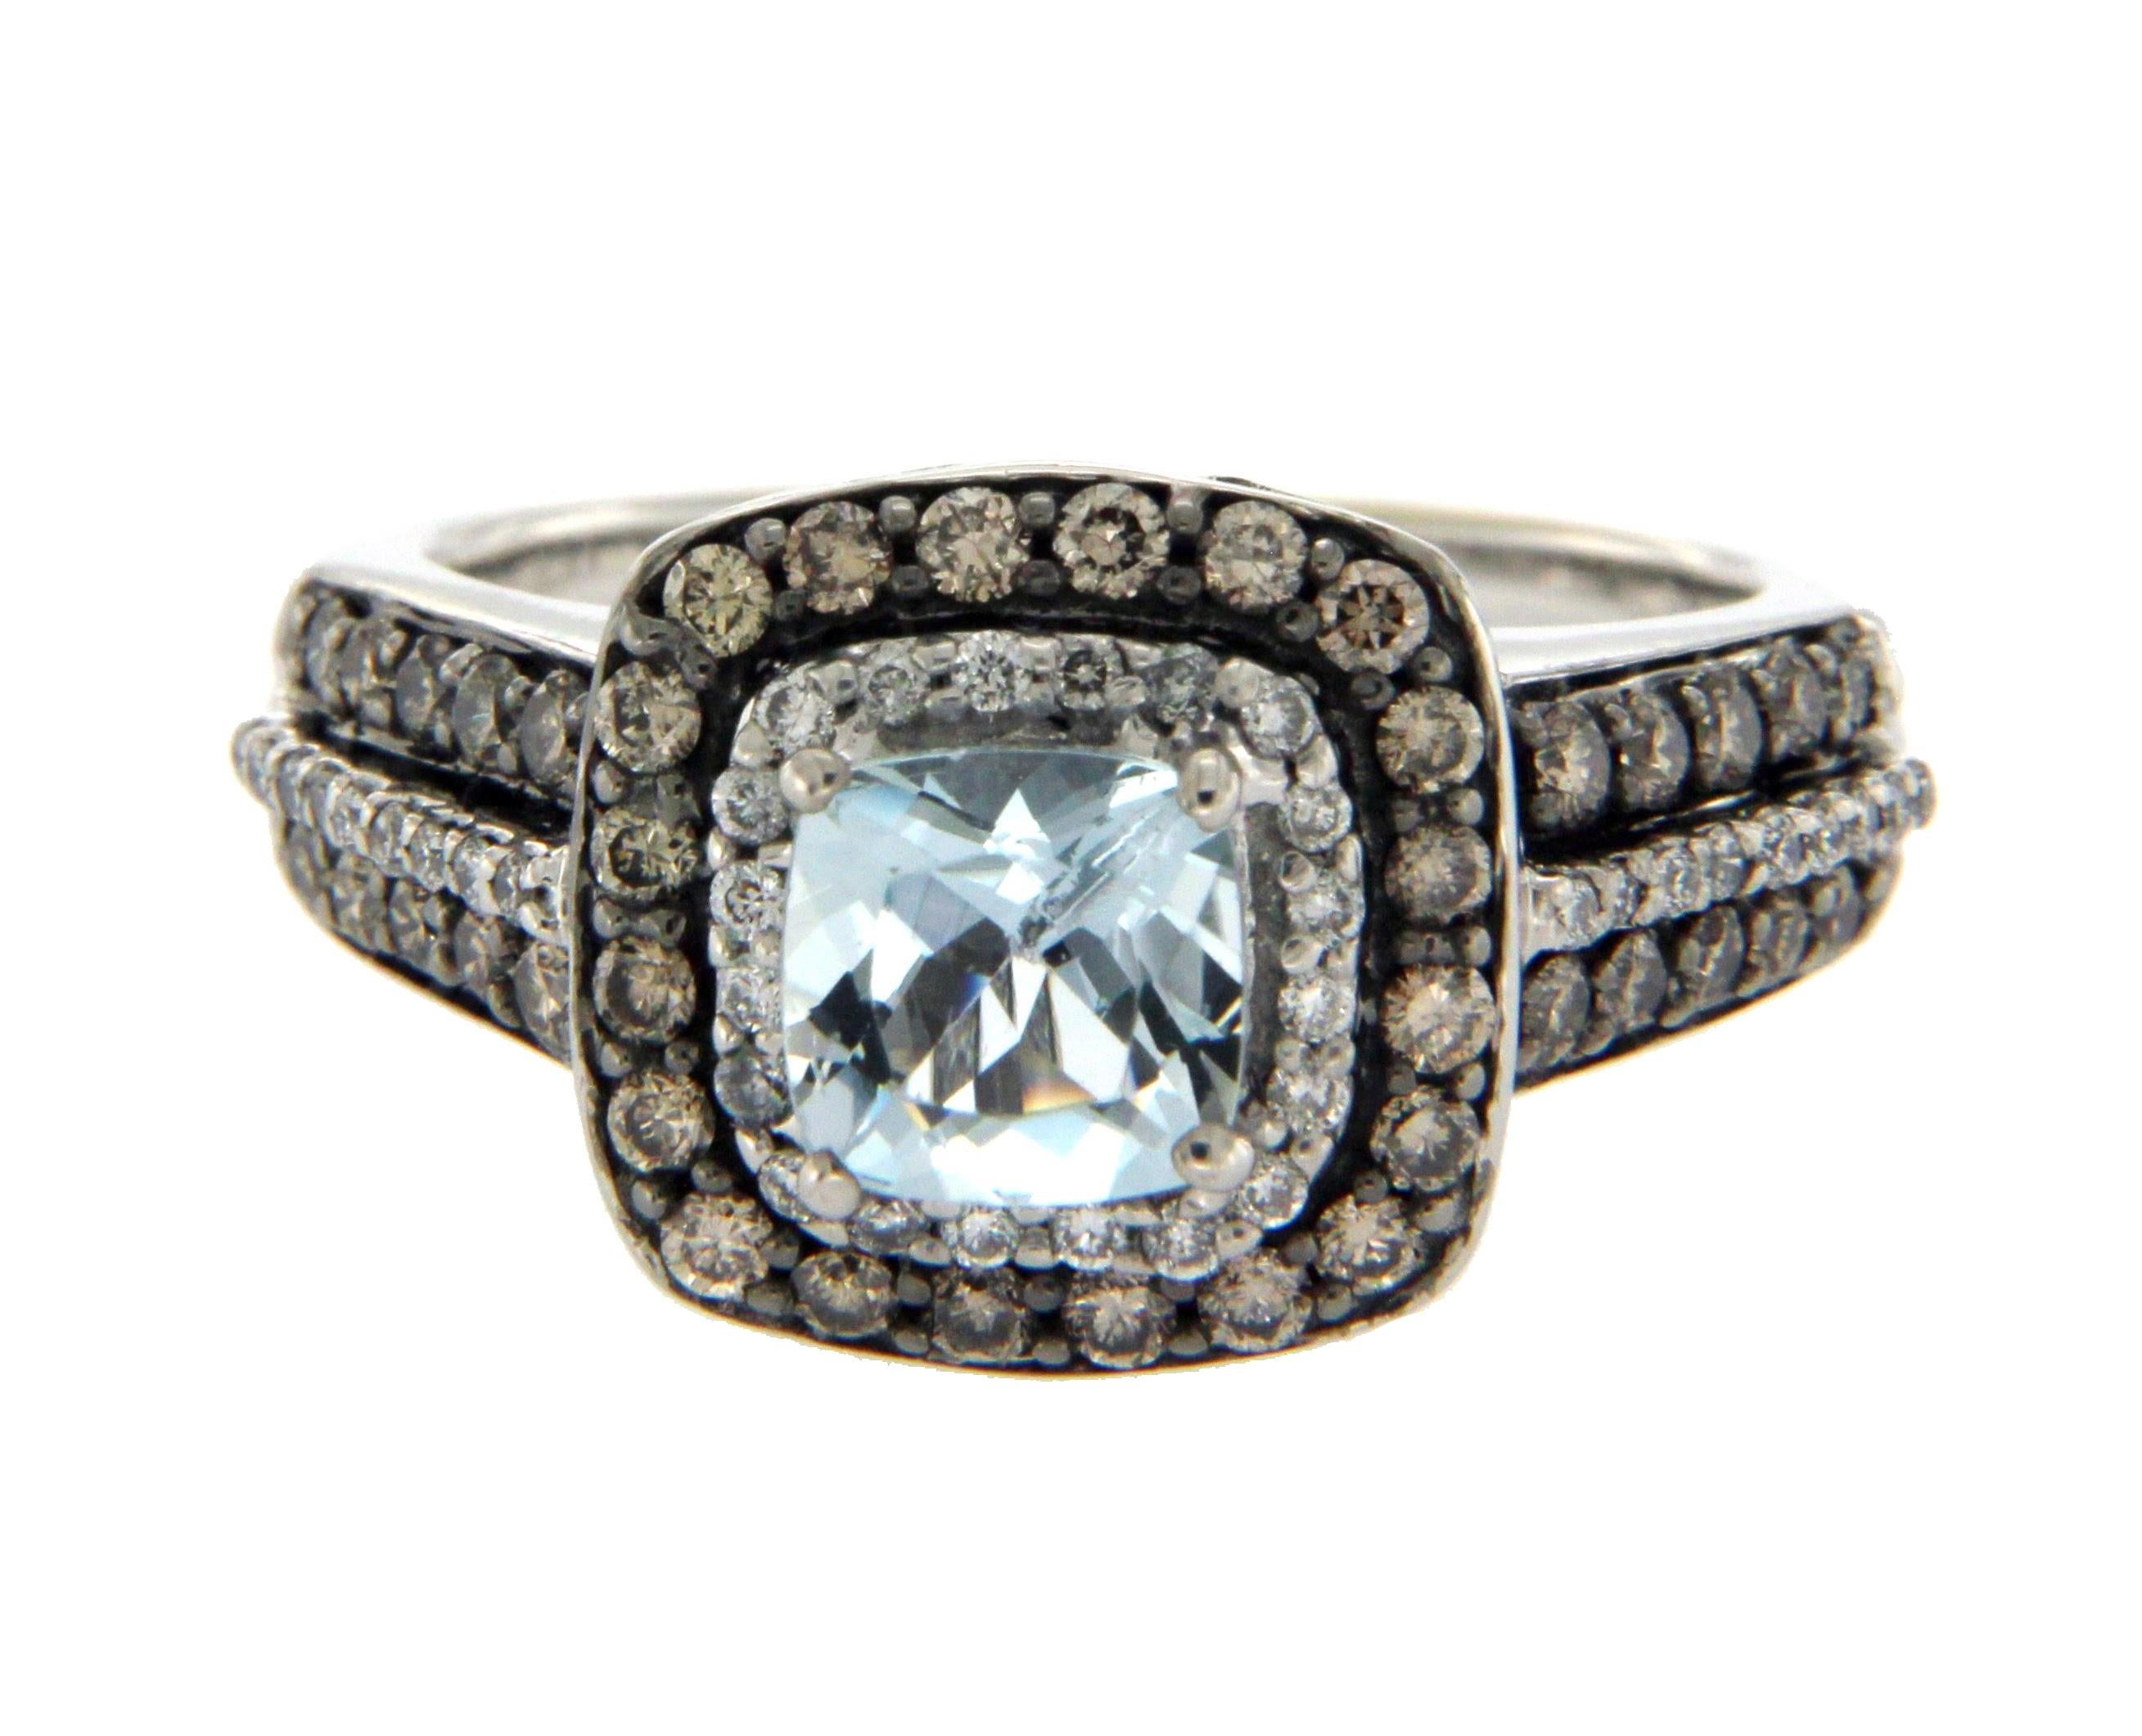 Type: Ring
Top: 12 mm
Band Width: 2.75 mm
Metal: White Gold 
Metal Purity: 14K
Hallmarks: Levian 14K 
Total Weight: 6.9 Gram 
Size: 6.75
Condition: Pre Owned
Stone Type: Blue Topaz & Diamonds